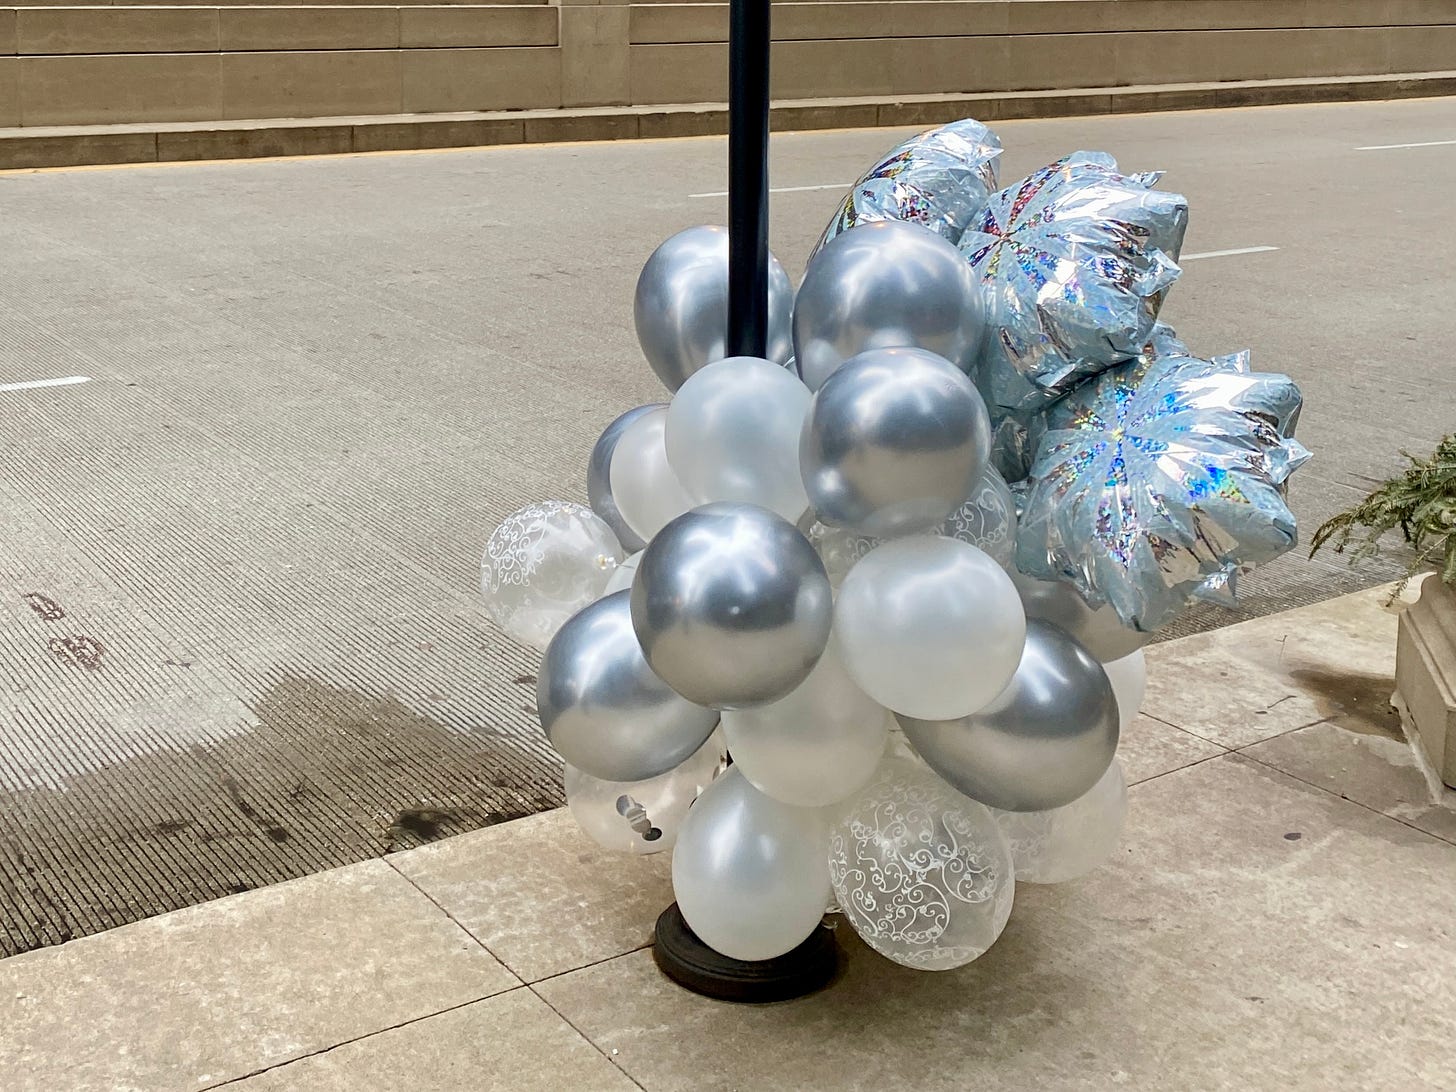 A photograph of white and silver balloons tied to a sign post in Chicago. I took this in 2023.